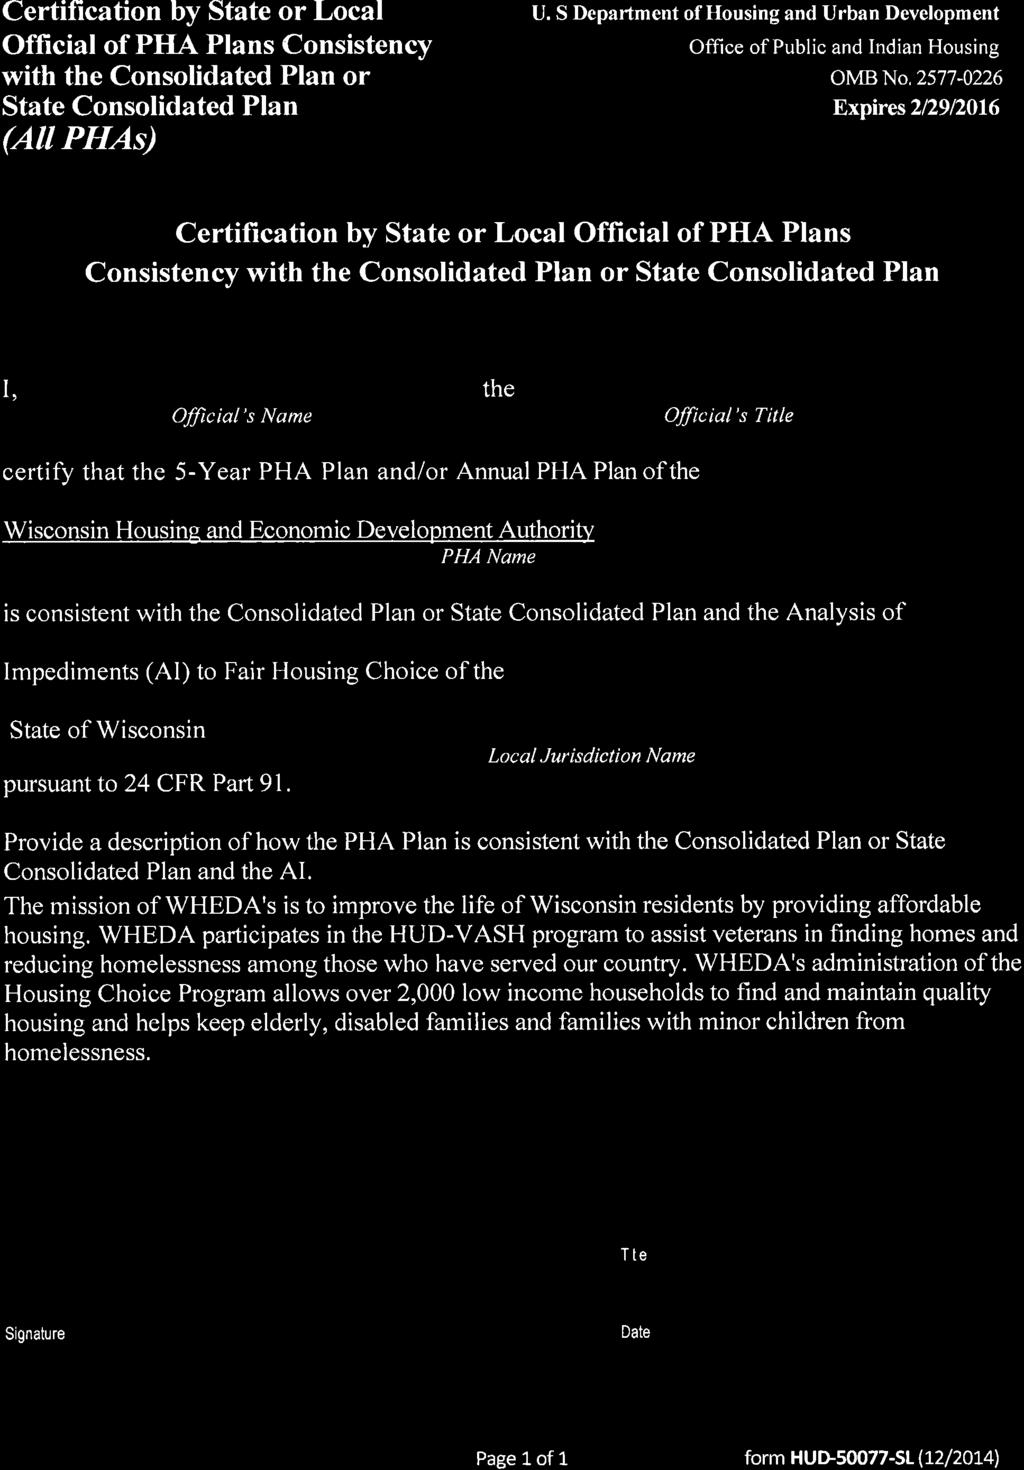 Certification by State or Local Official of PHA Plans Consistency with the Consolidated Plan or State Consolidated Plan (All PHAs) U.